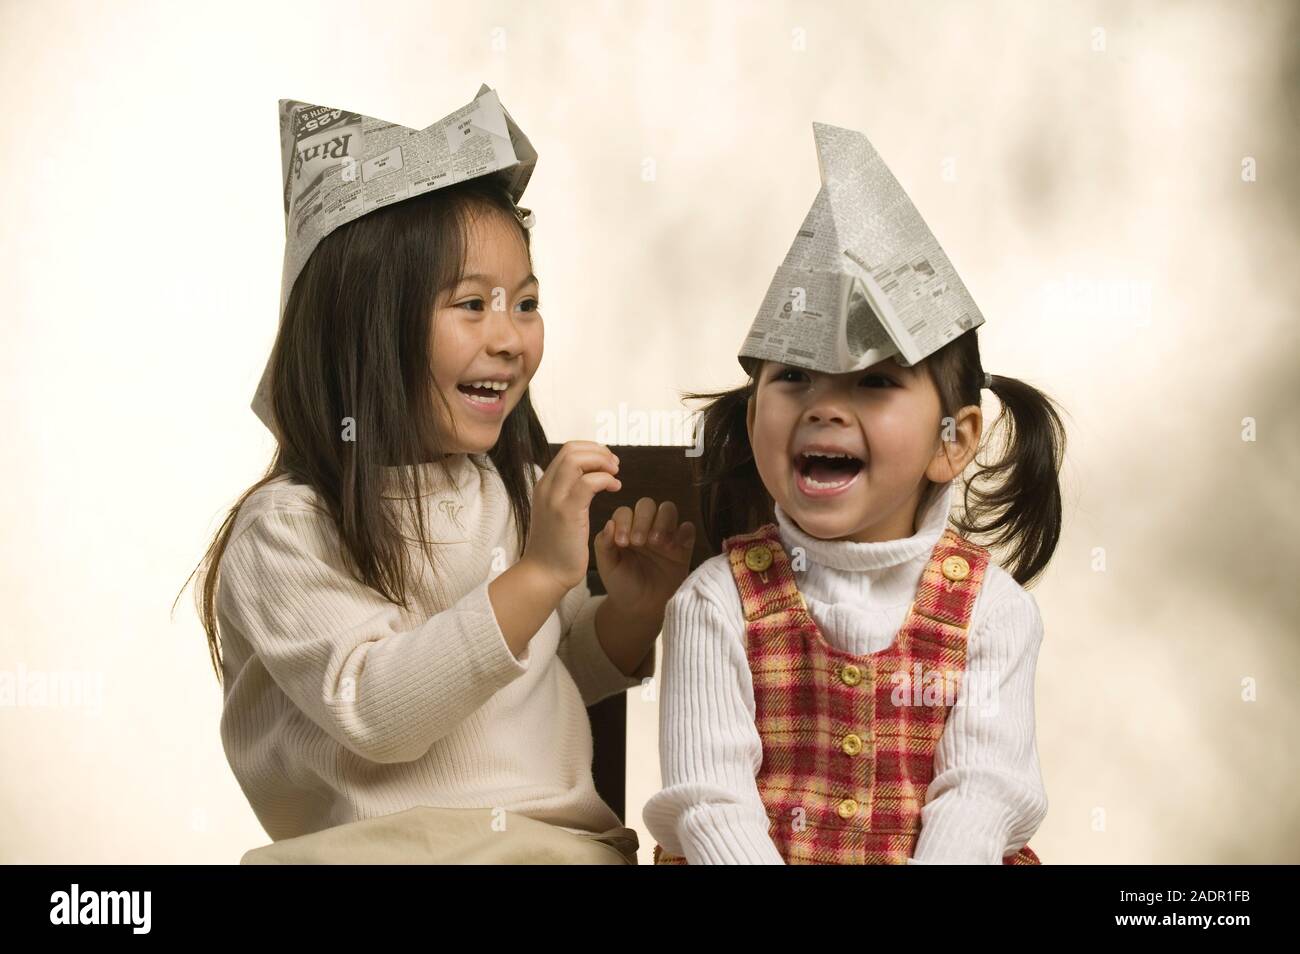 Portrait of two young Asian sisters wearing paper hats on a plain background Stock Photo